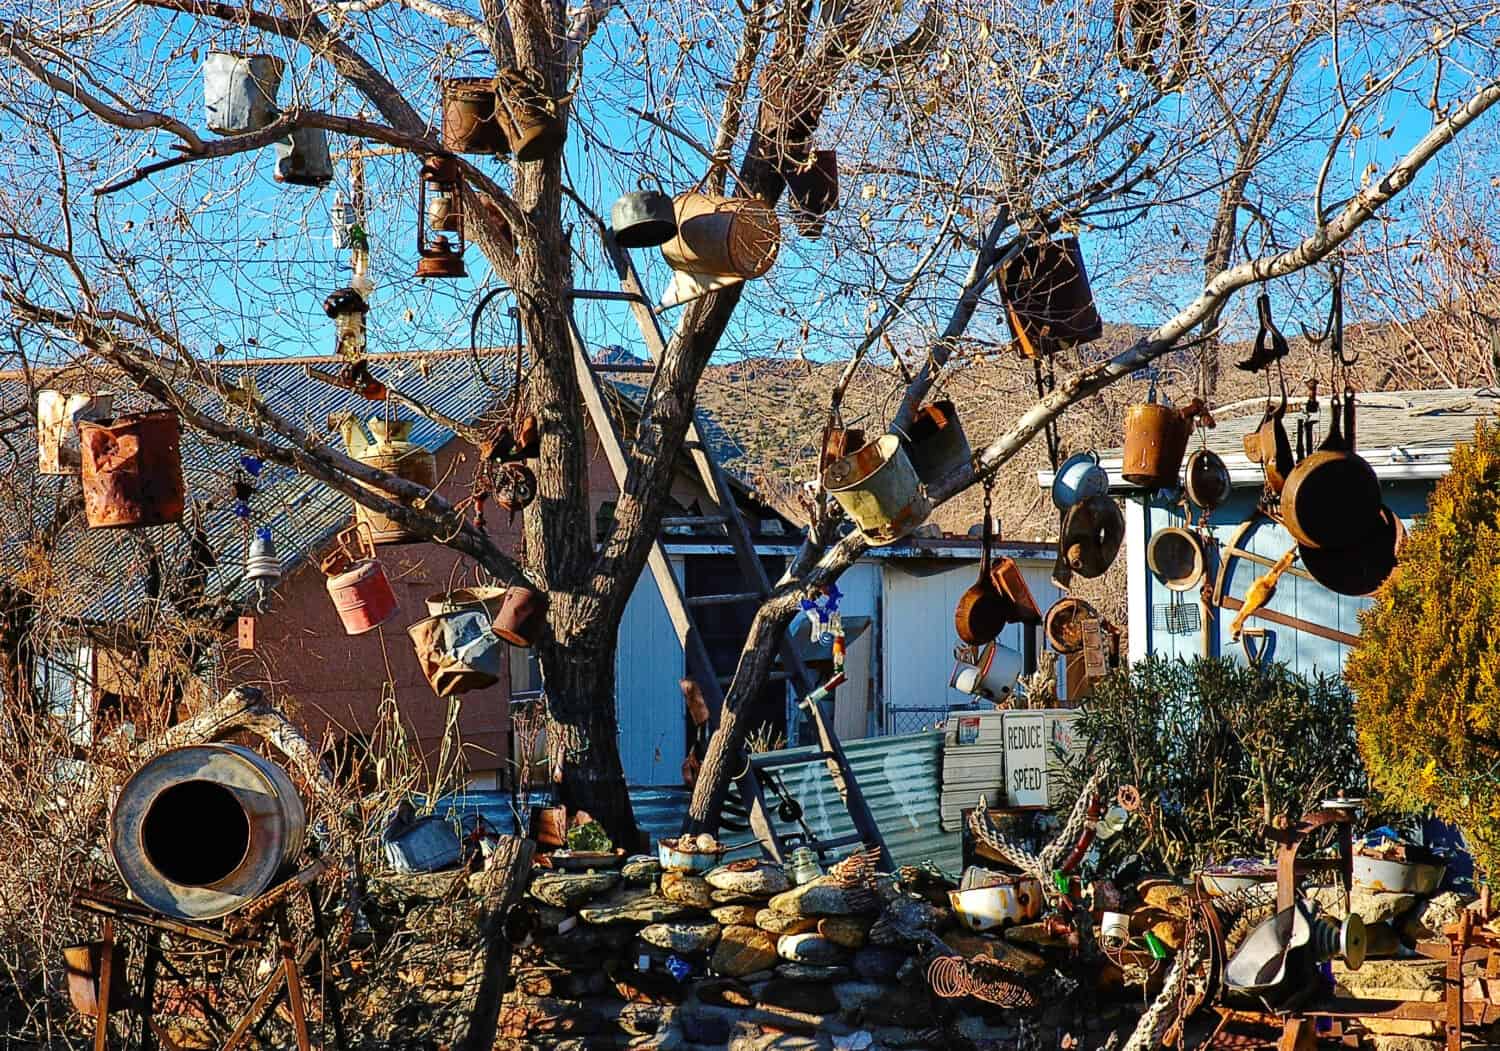 collection of rusted metal cans, buckets and other objects hanging from a tree against a desert landscape